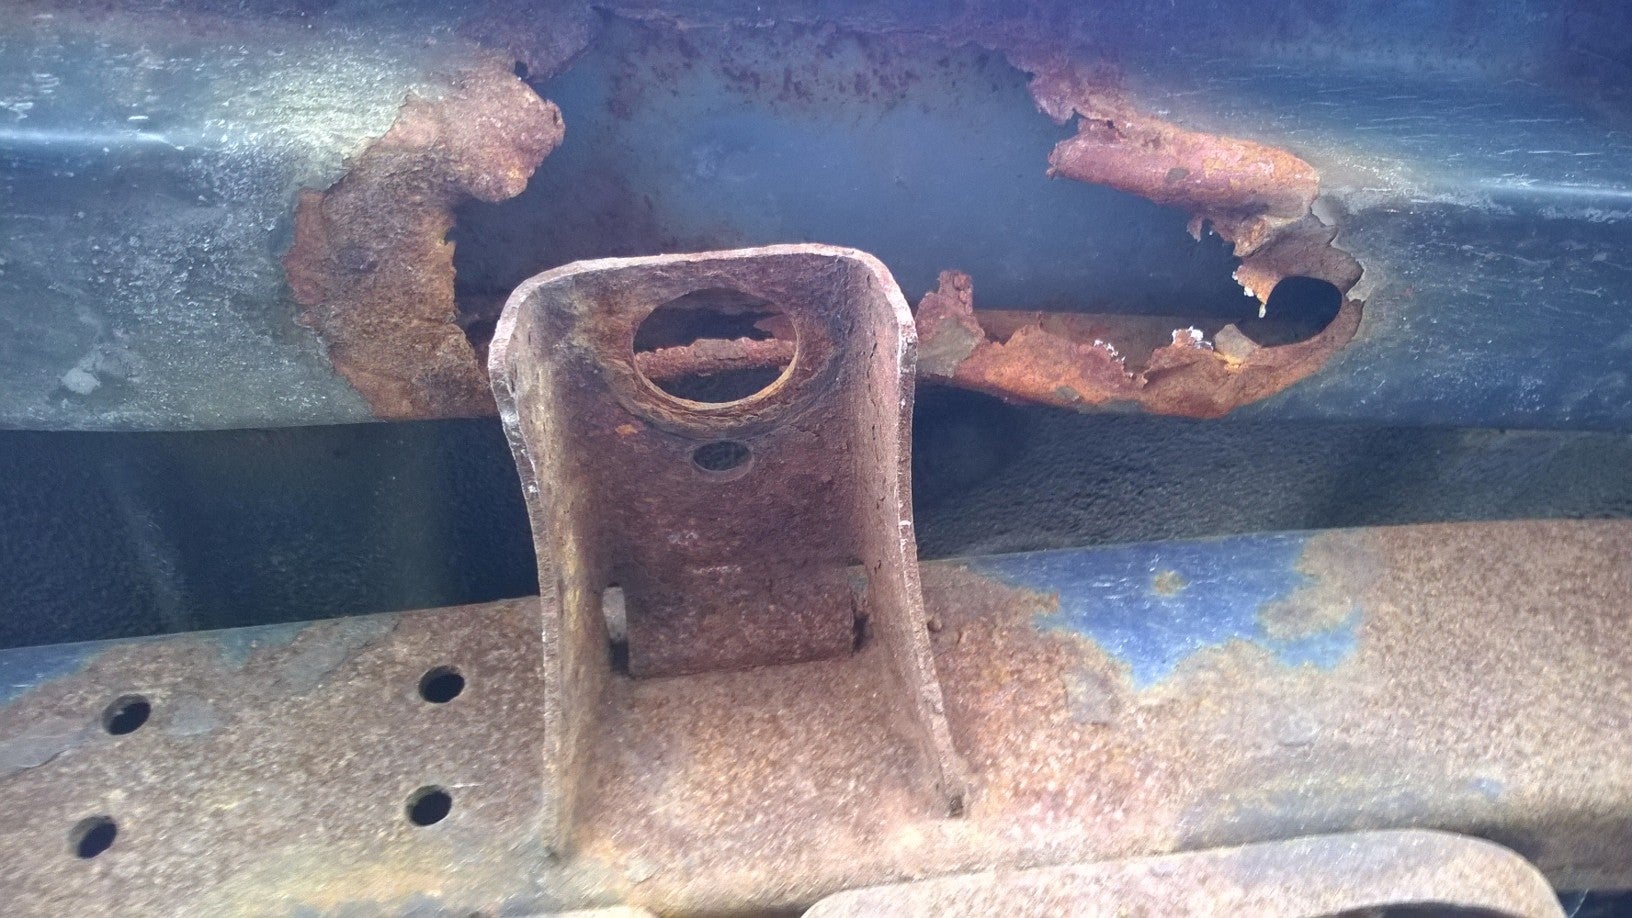 rusted through frame at body mounts | Jeep Enthusiast Forums